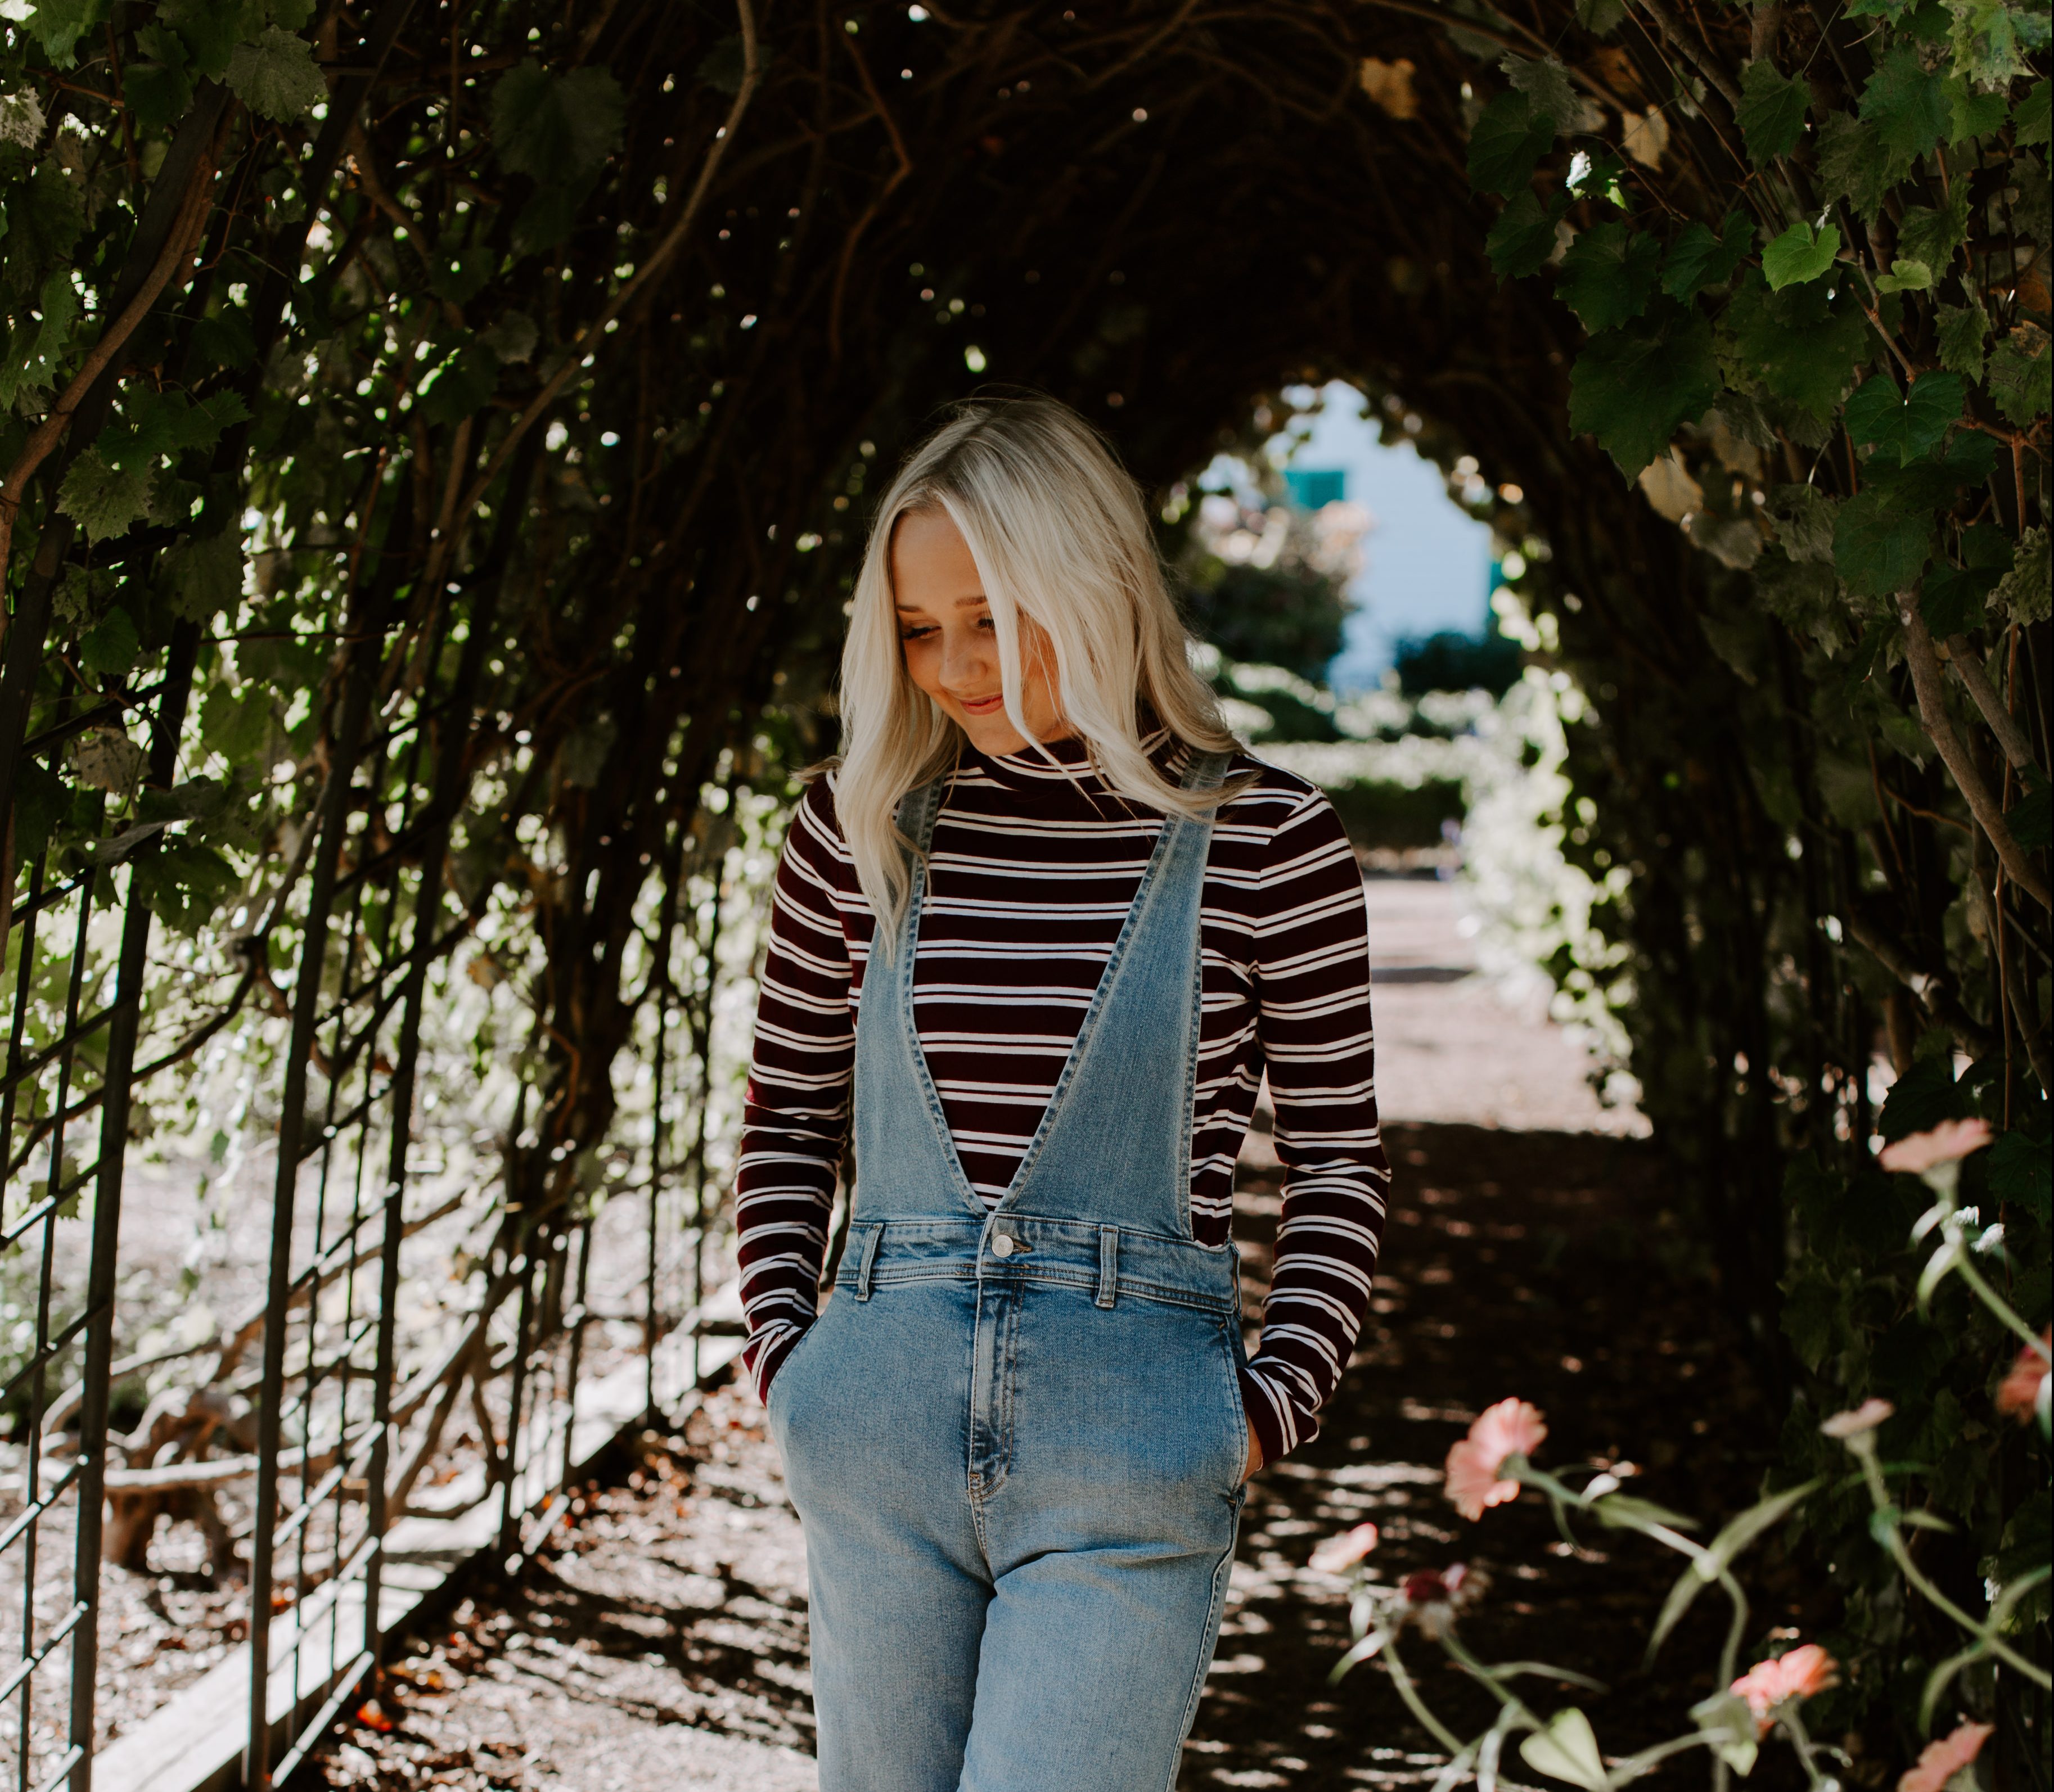 Ashley W. free people senior pictures leaf tunnel striped shirt boots candid model pose wedding elopement blonde hair outfit overalls